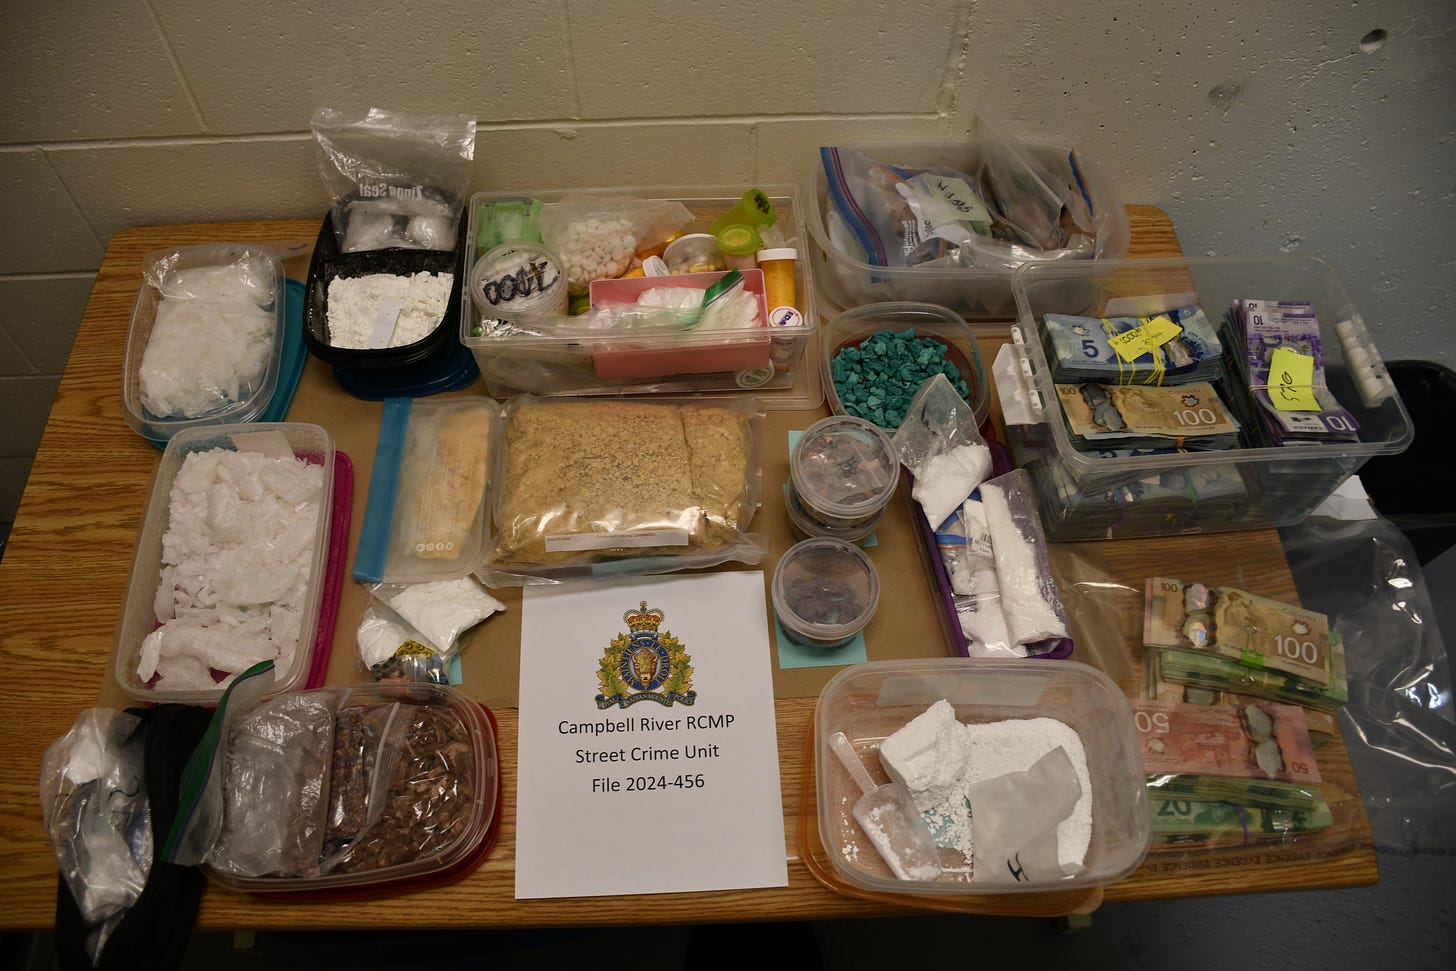 A table full of drugs in various forms, including powder, crystal, pills, in a number of different colours, as well as stacks of bills. On the table, a sheet of paper has the RCMP crest, with the words "Campbell River RCMP street crime unit file 2024-456"